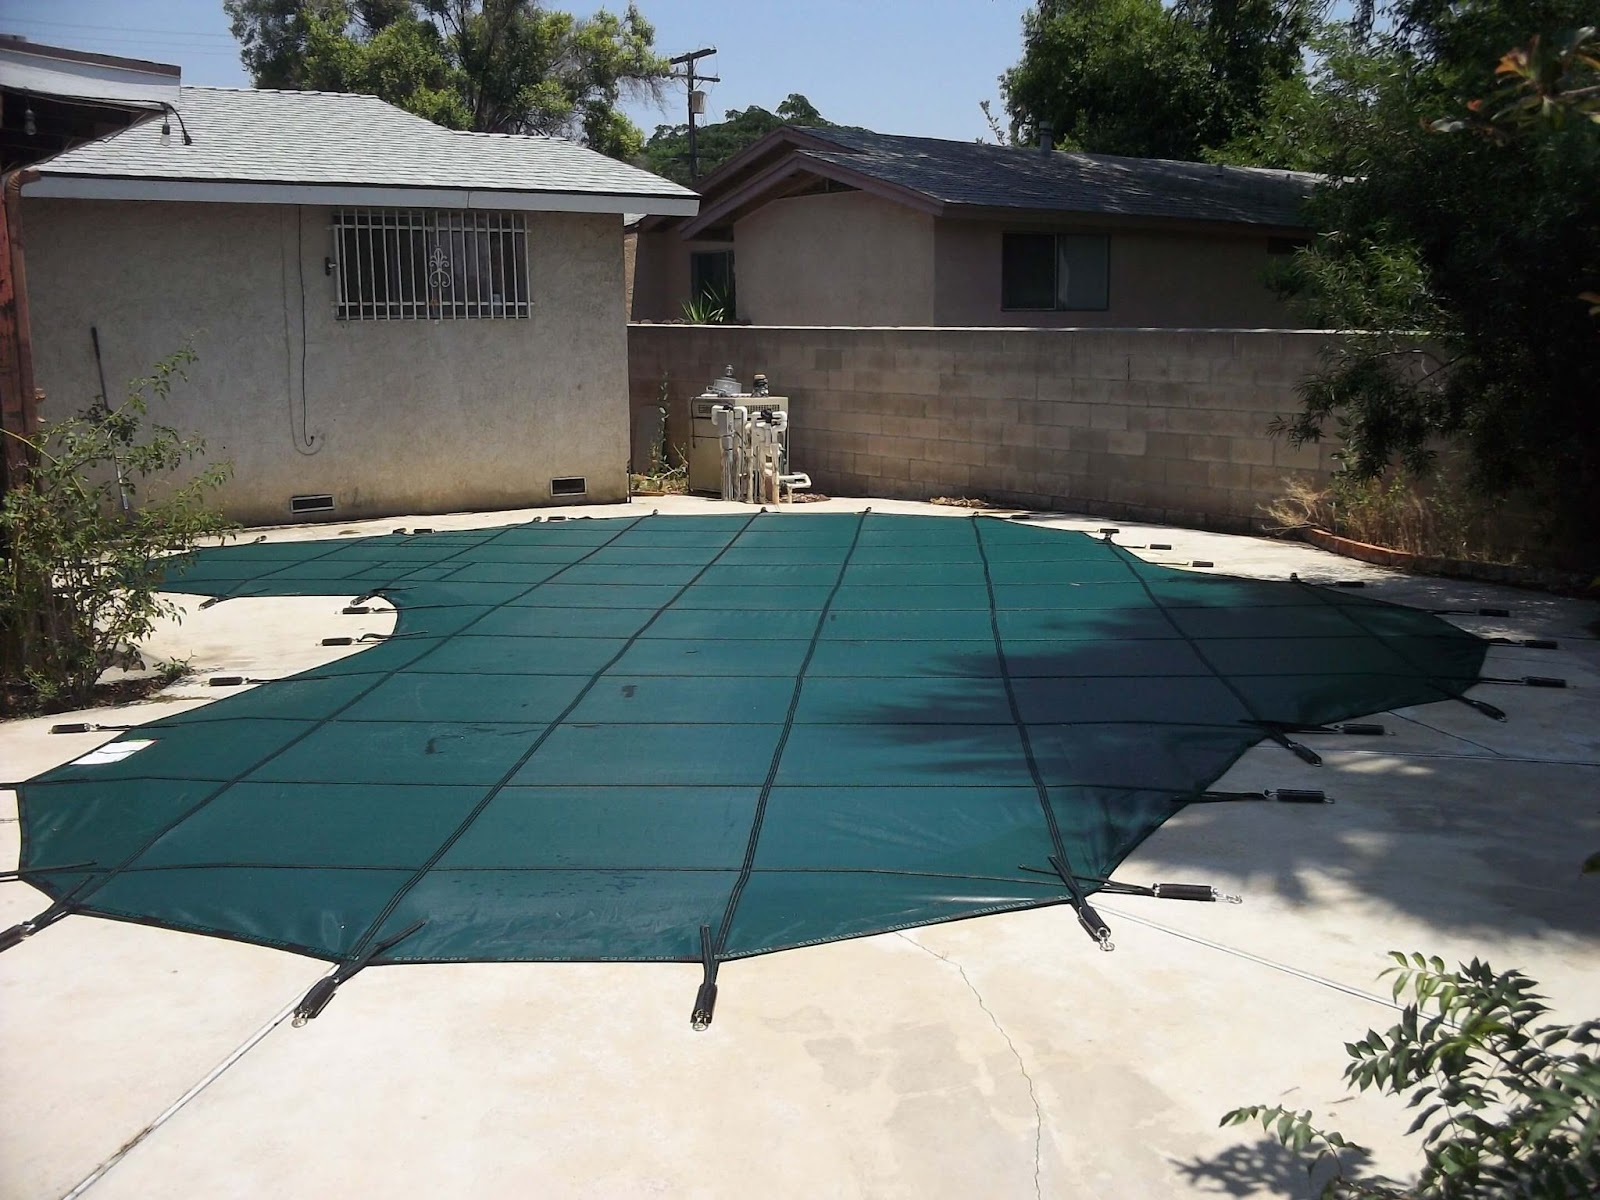 Green mesh pool cover tightly secured above an in-ground pool